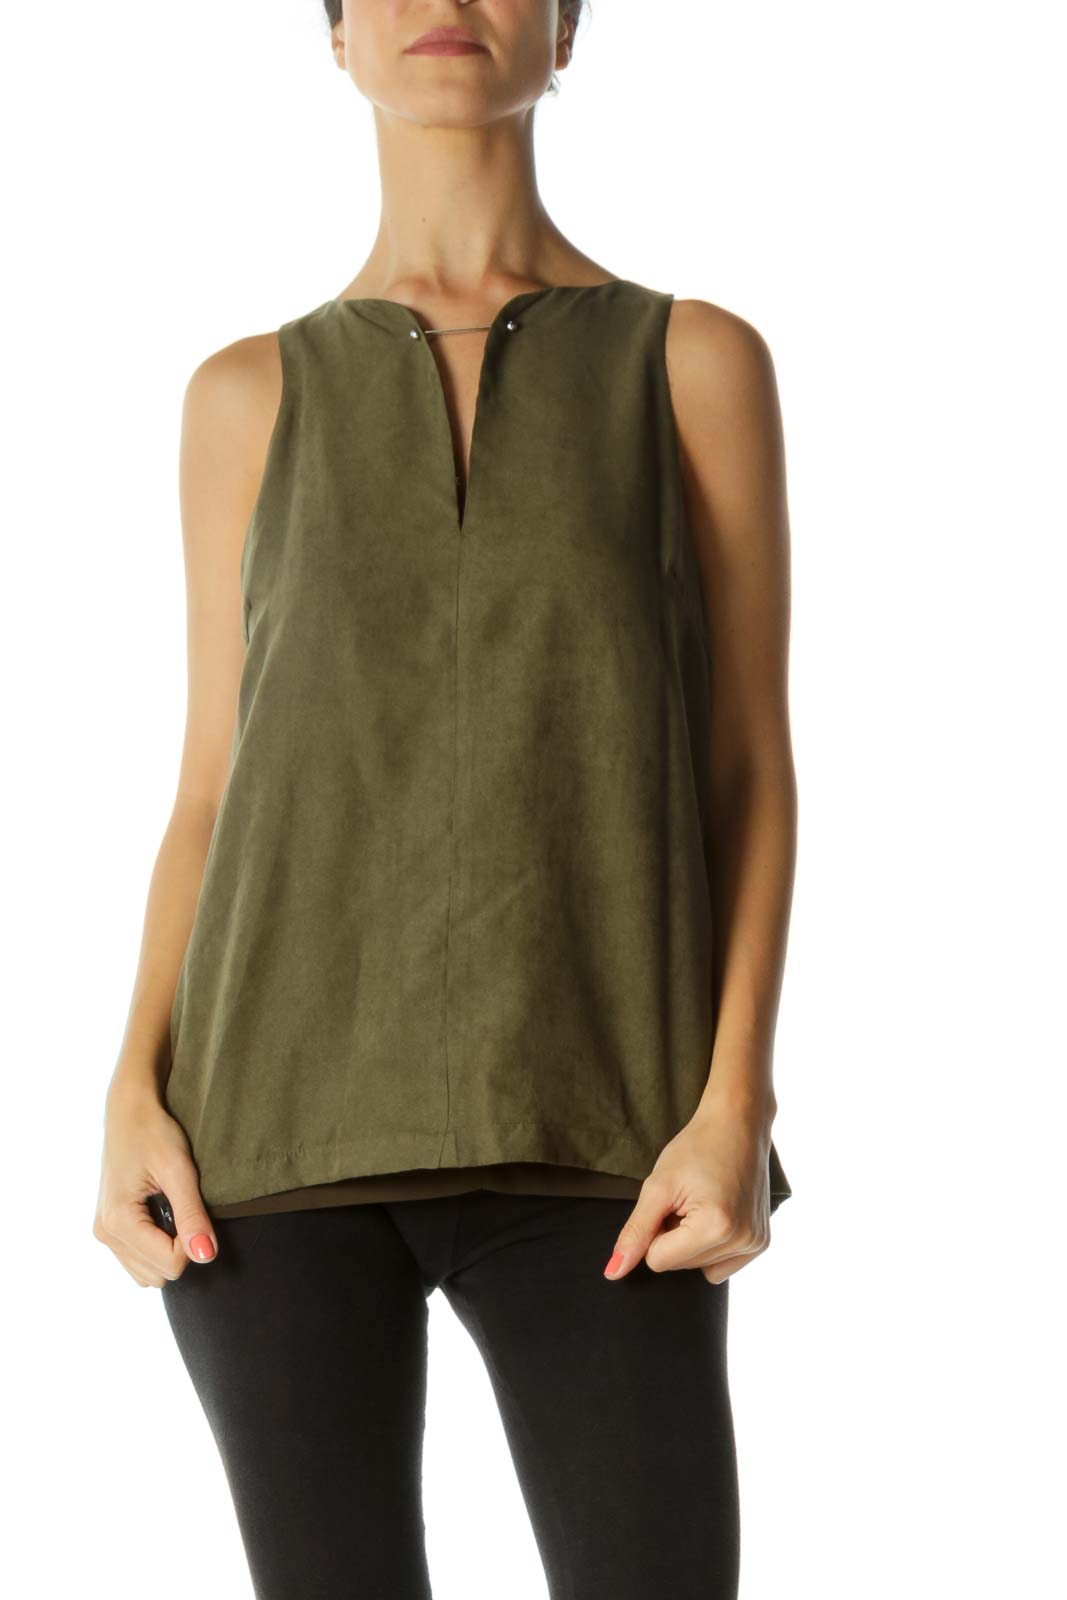 Olive Green Faux-Suede Metallic Detail Keyhole Lined Tank Top Front